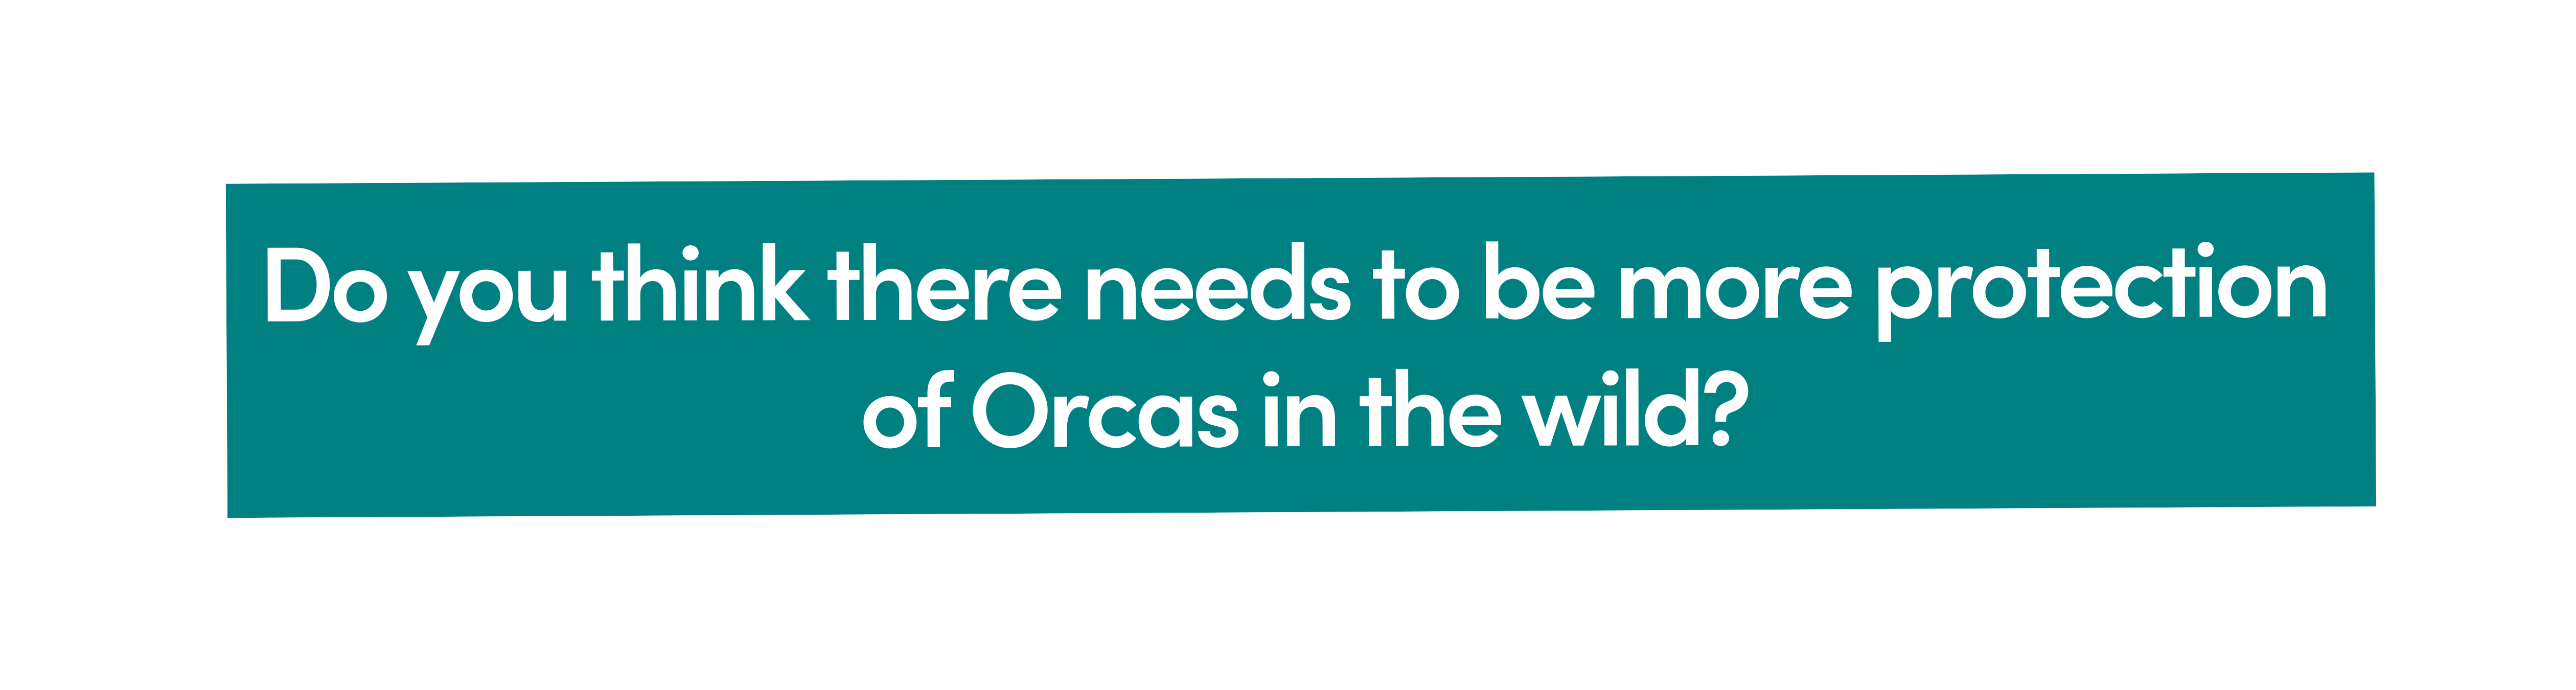 Do you think there needs to be more protection of Orcas in the wild?